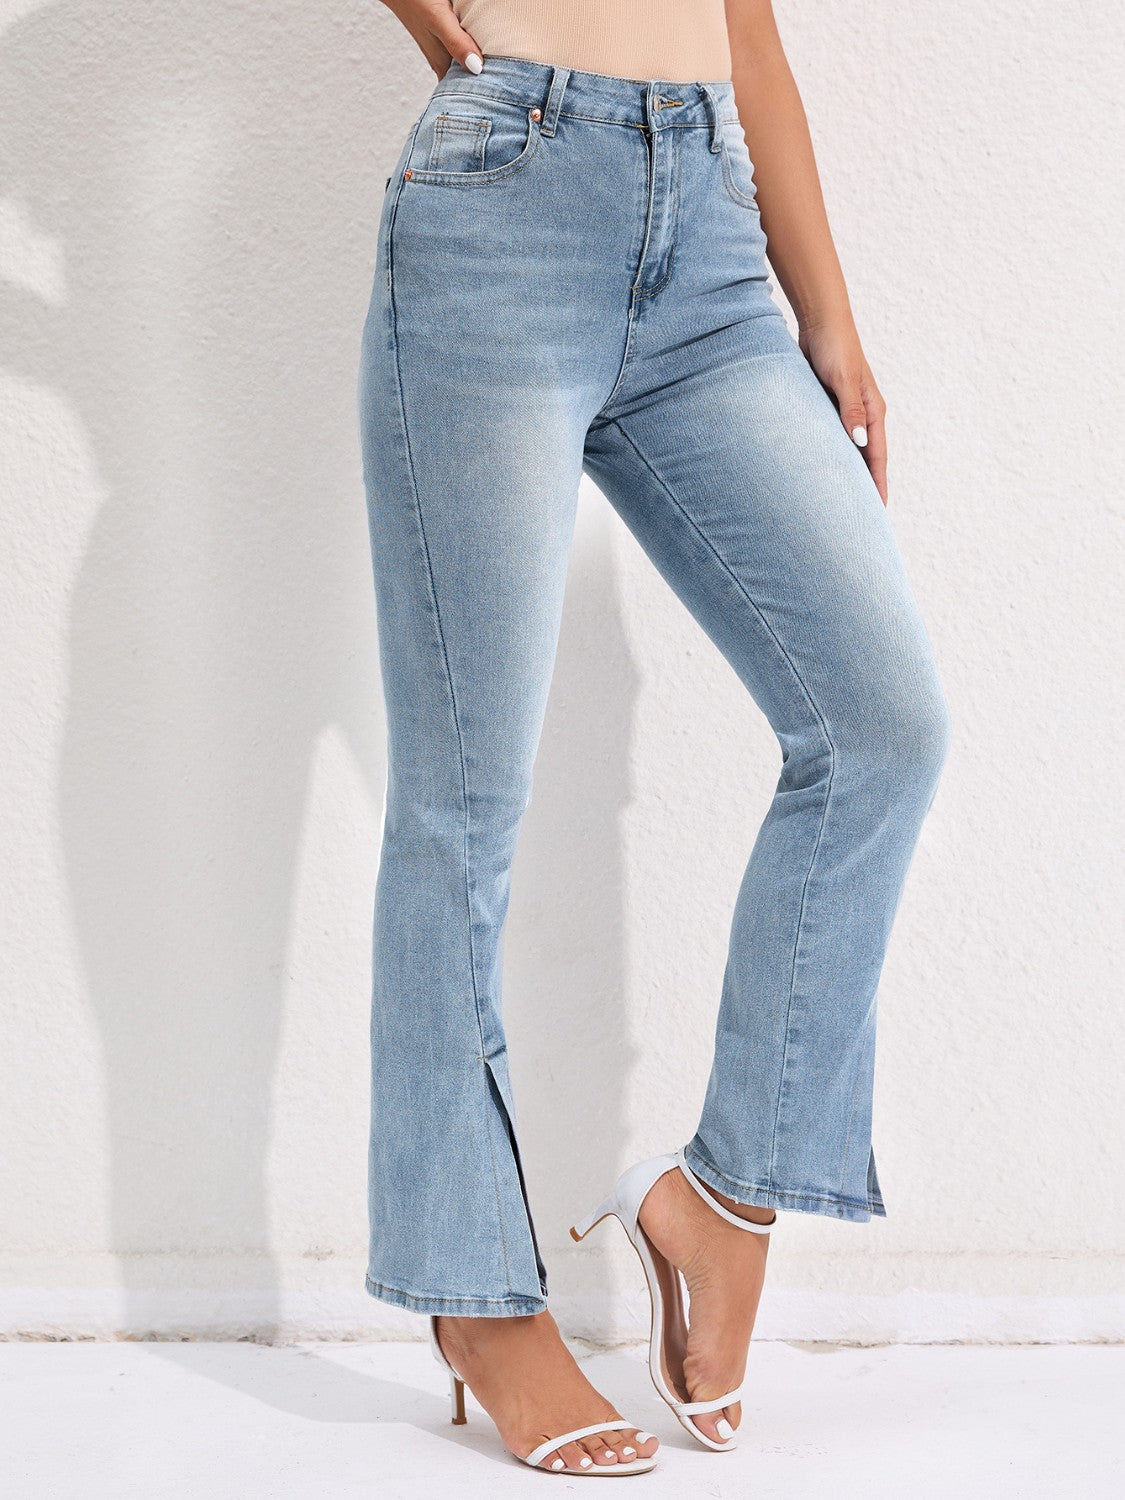 Slit Buttoned Jeans with Pockets New women's Fashion KESLEY